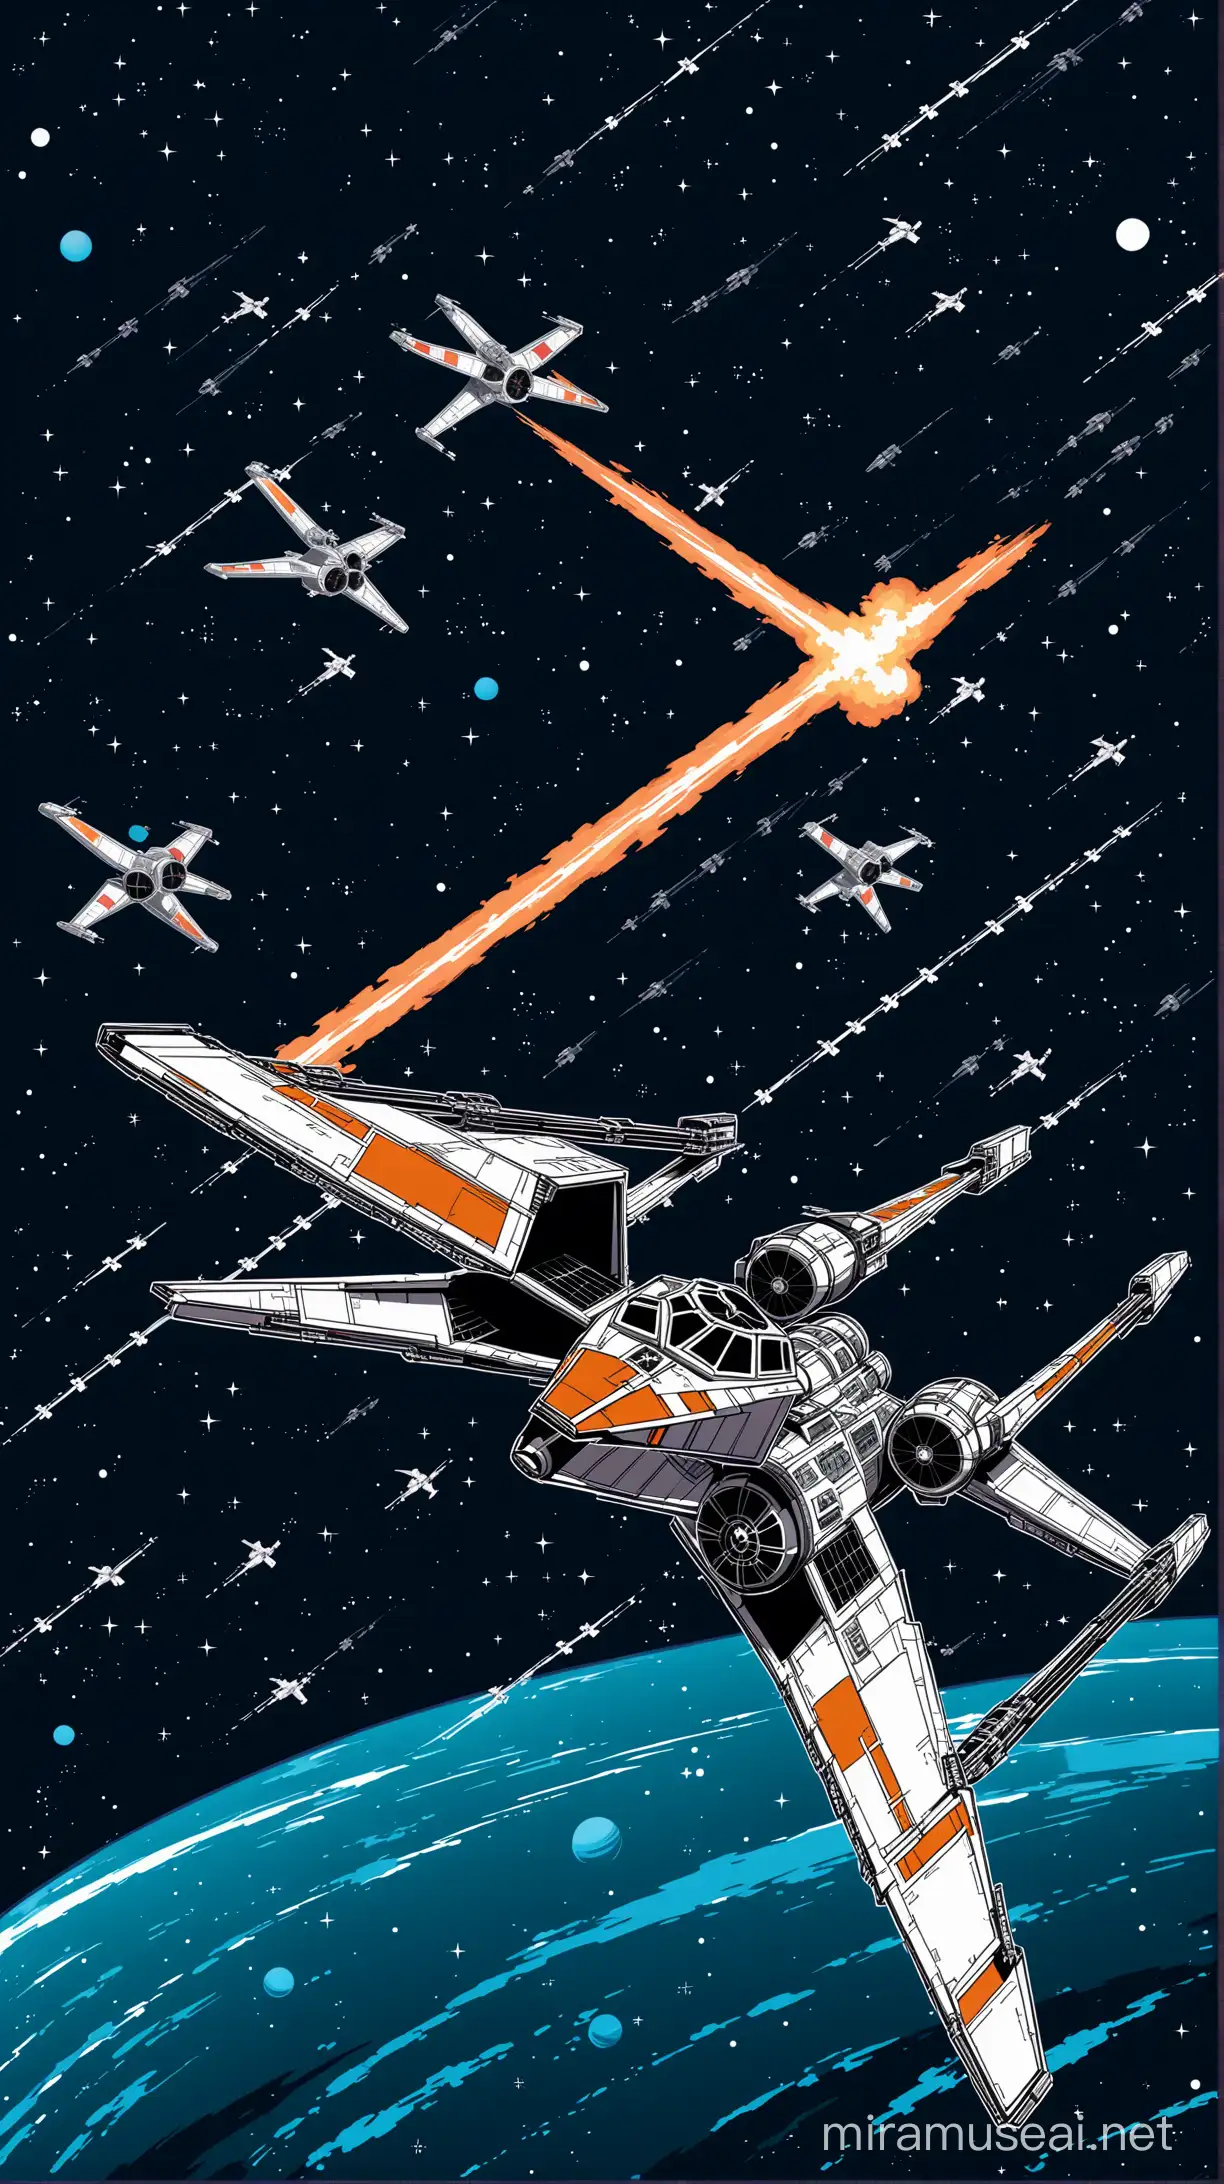 Xwing vs TIE Fighter Battle in Galactic Space